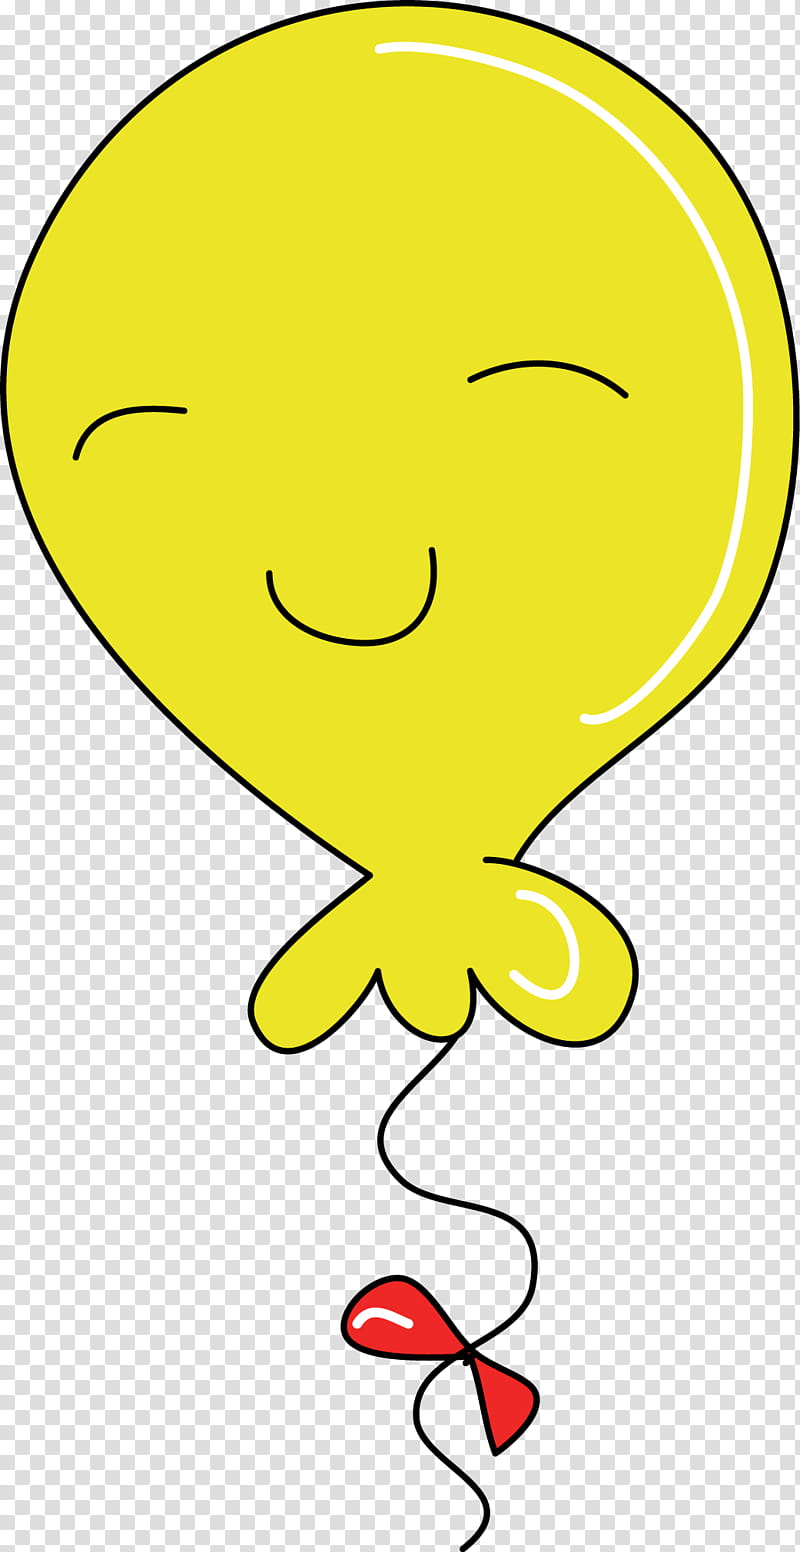 Look UP FREE set, yellow balloon illustration transparent background PNG clipart